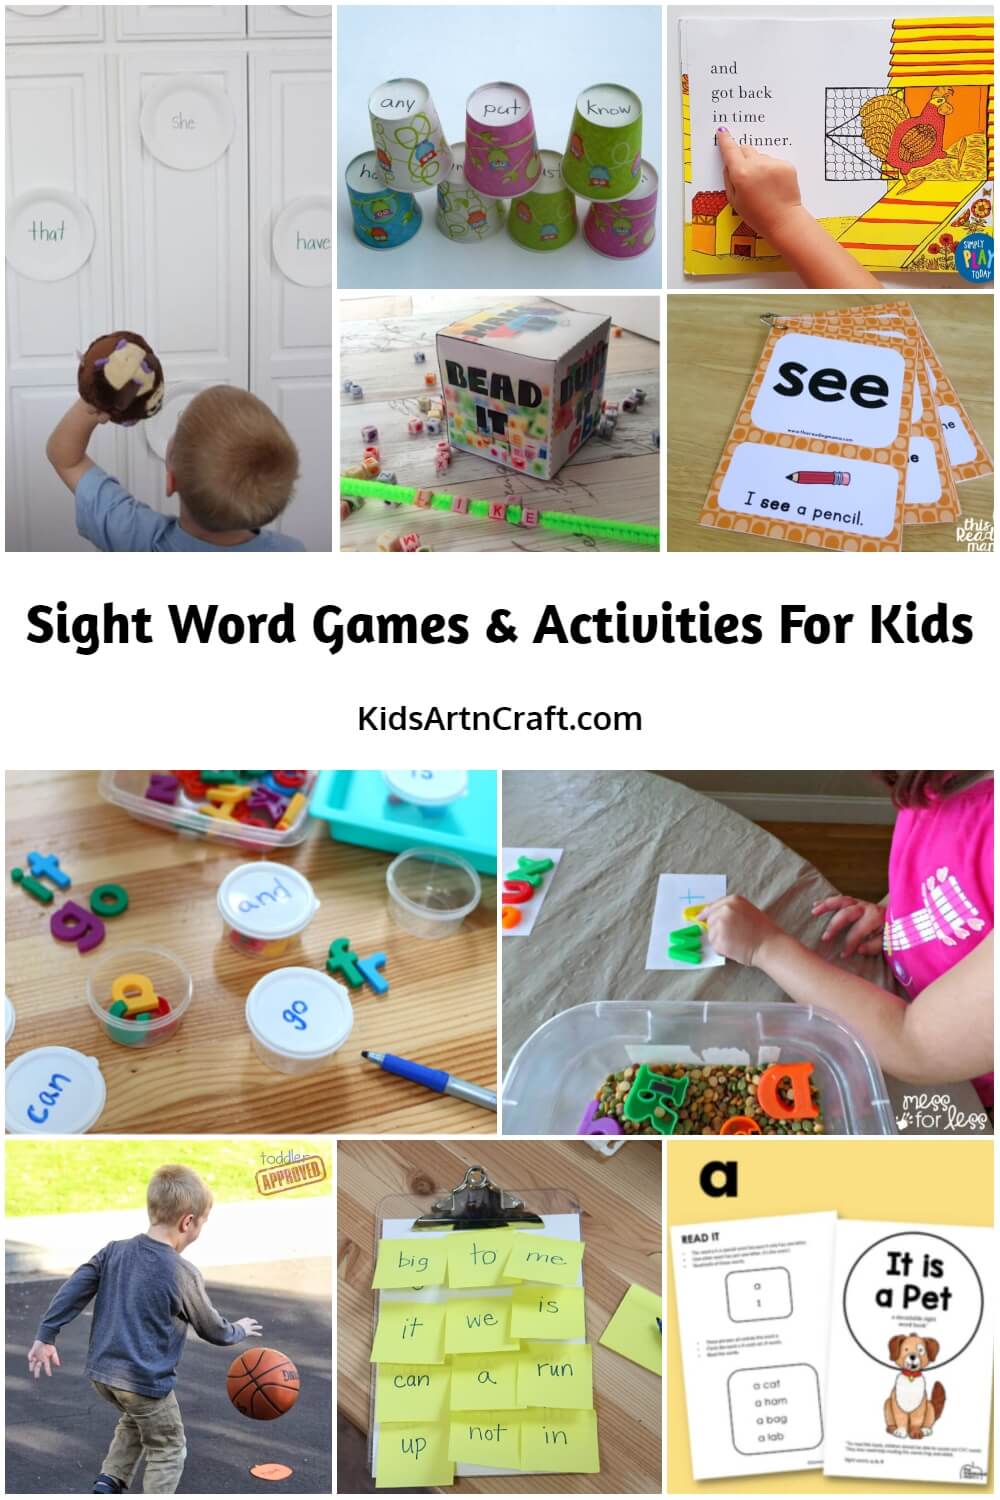 Sight Word Games & Activities For Kids